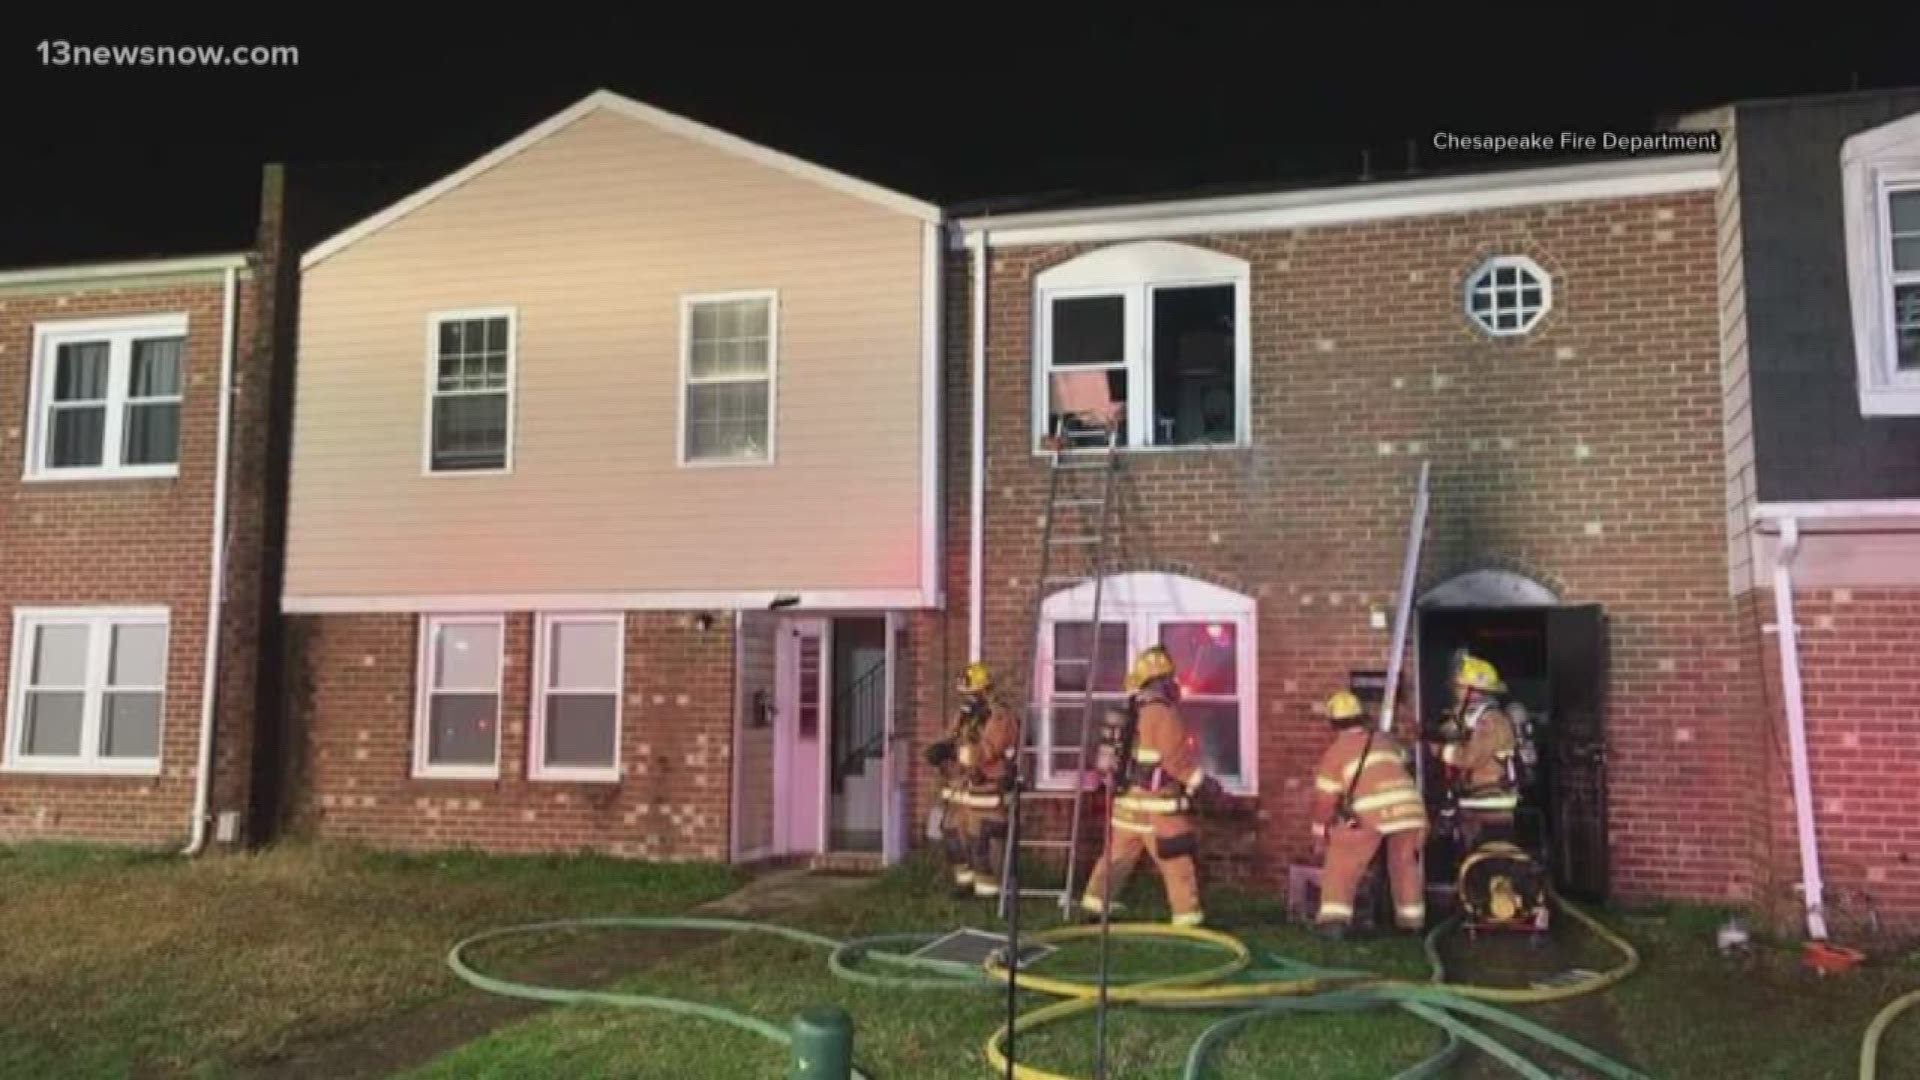 The fire on Holly Cove Drive forced a family out of their home overnight.